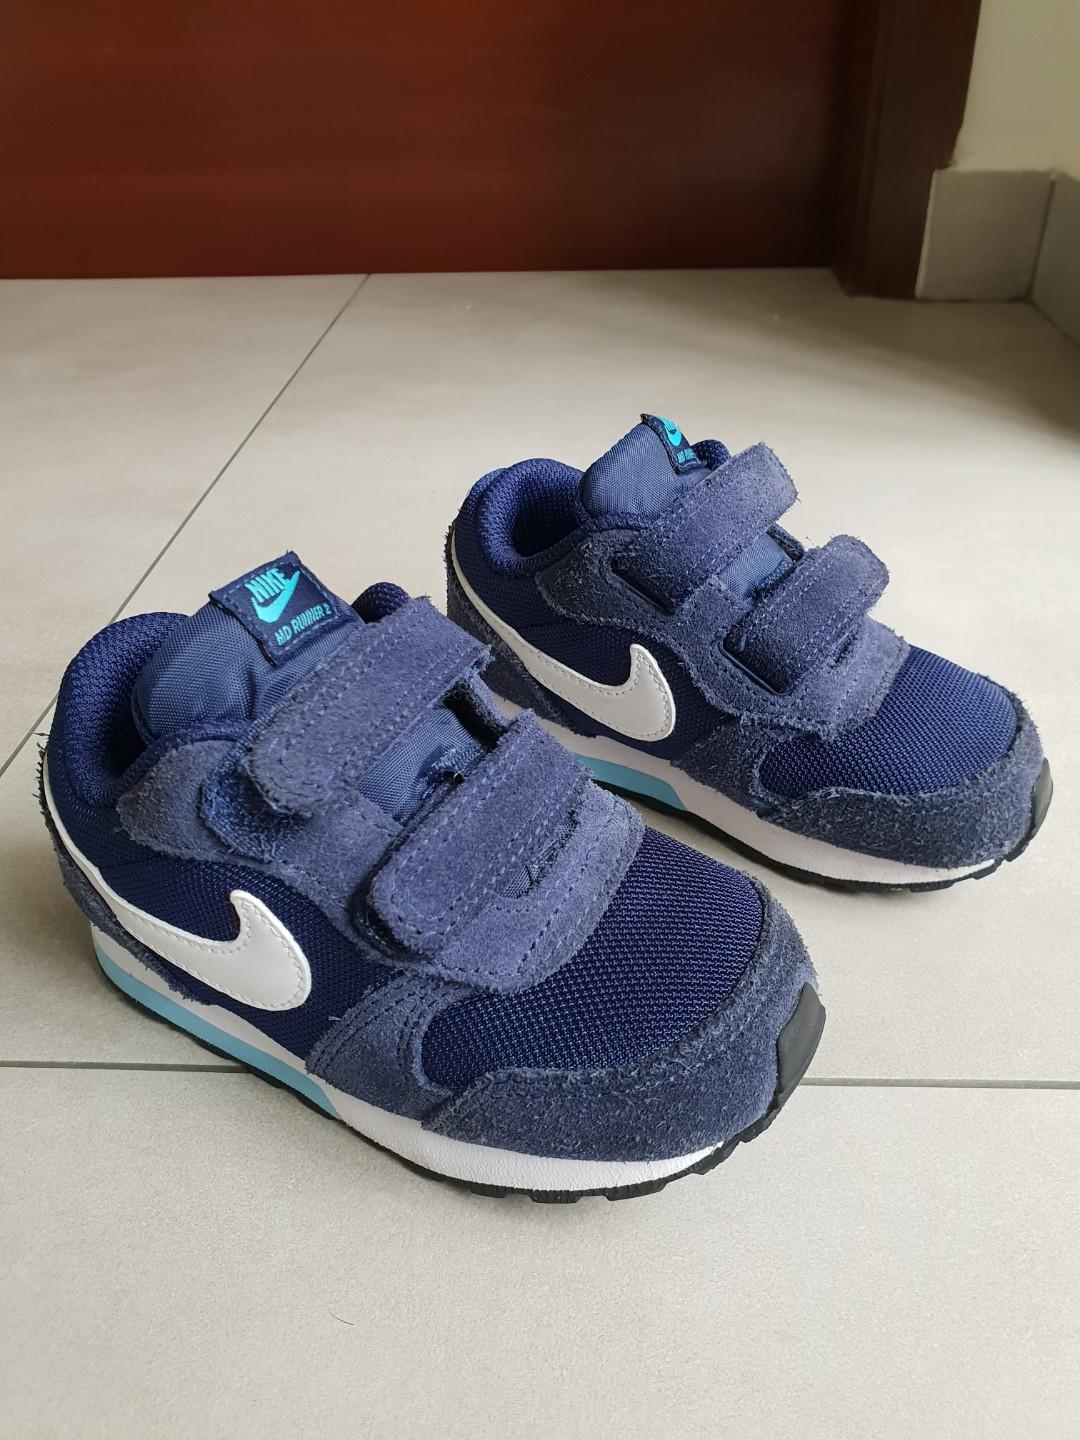 nike for 3 years old